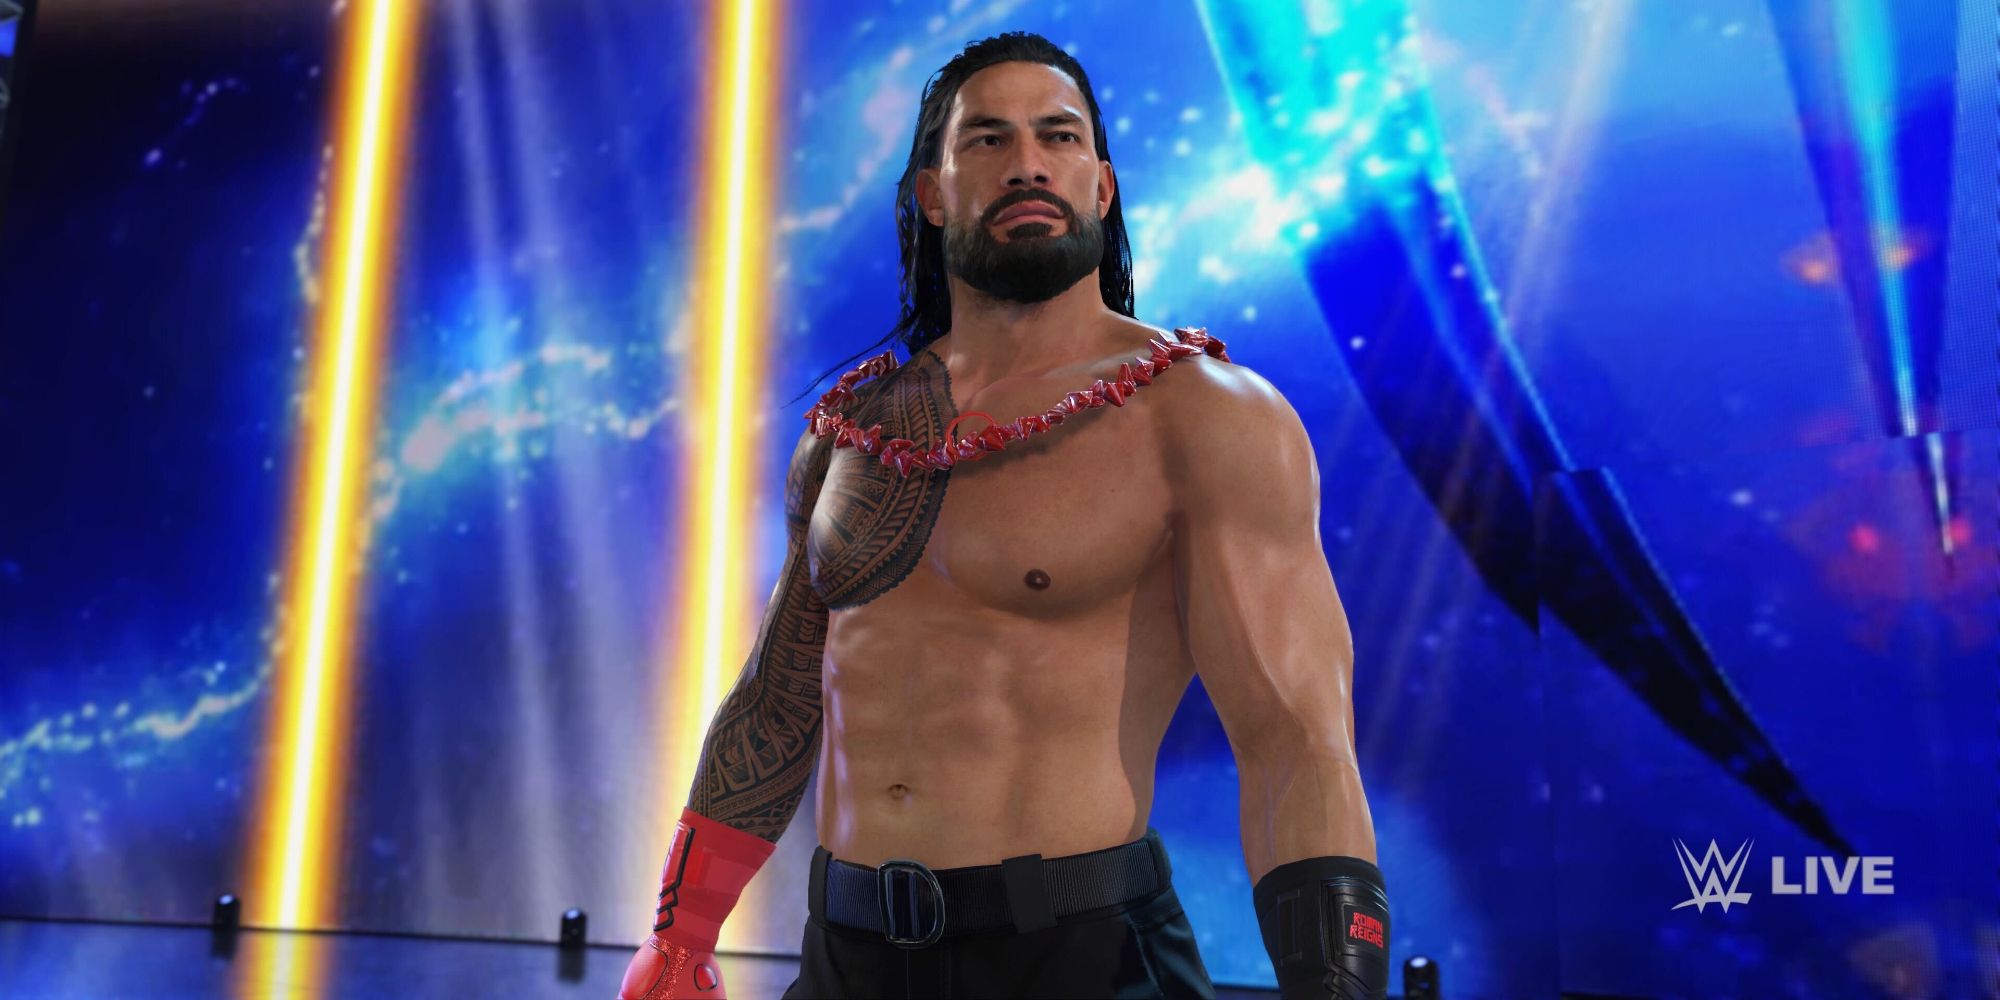 Roman Reigns making his way to the ring in WWE 2K23